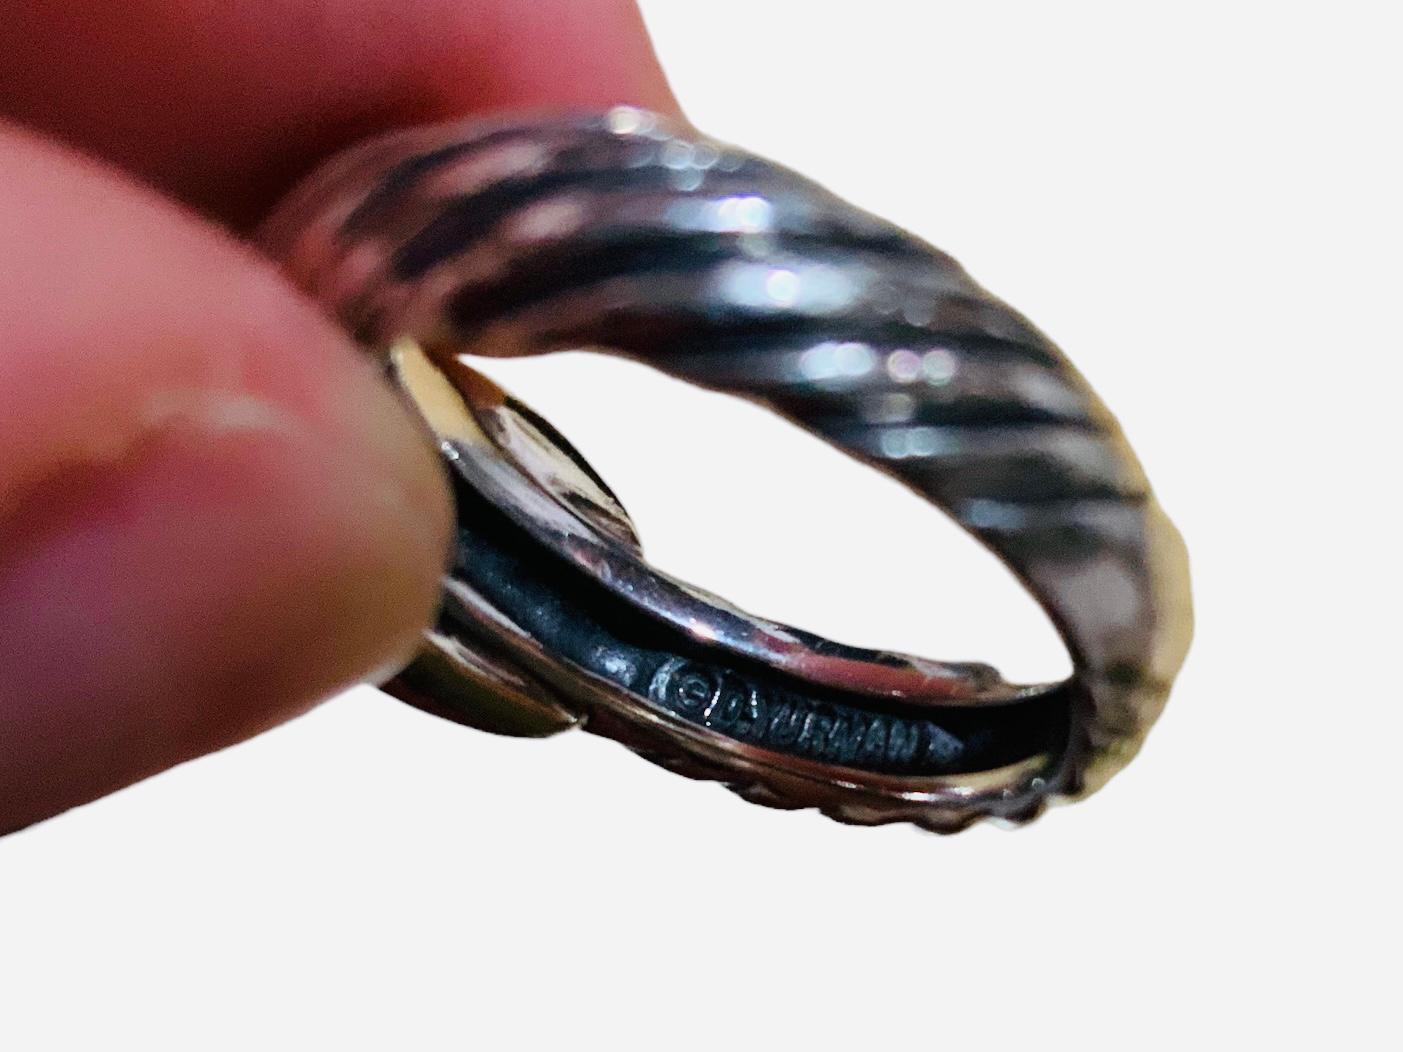 This is a 585 ( 14K ) gold and 925 sterling silver ring. It depicts a wide silver rope like band adorned with two crossed  wide ribbons in the center. It is hallmarked D.Yurman. It is also inscribed 925 and 585 inside the shank of the ring.